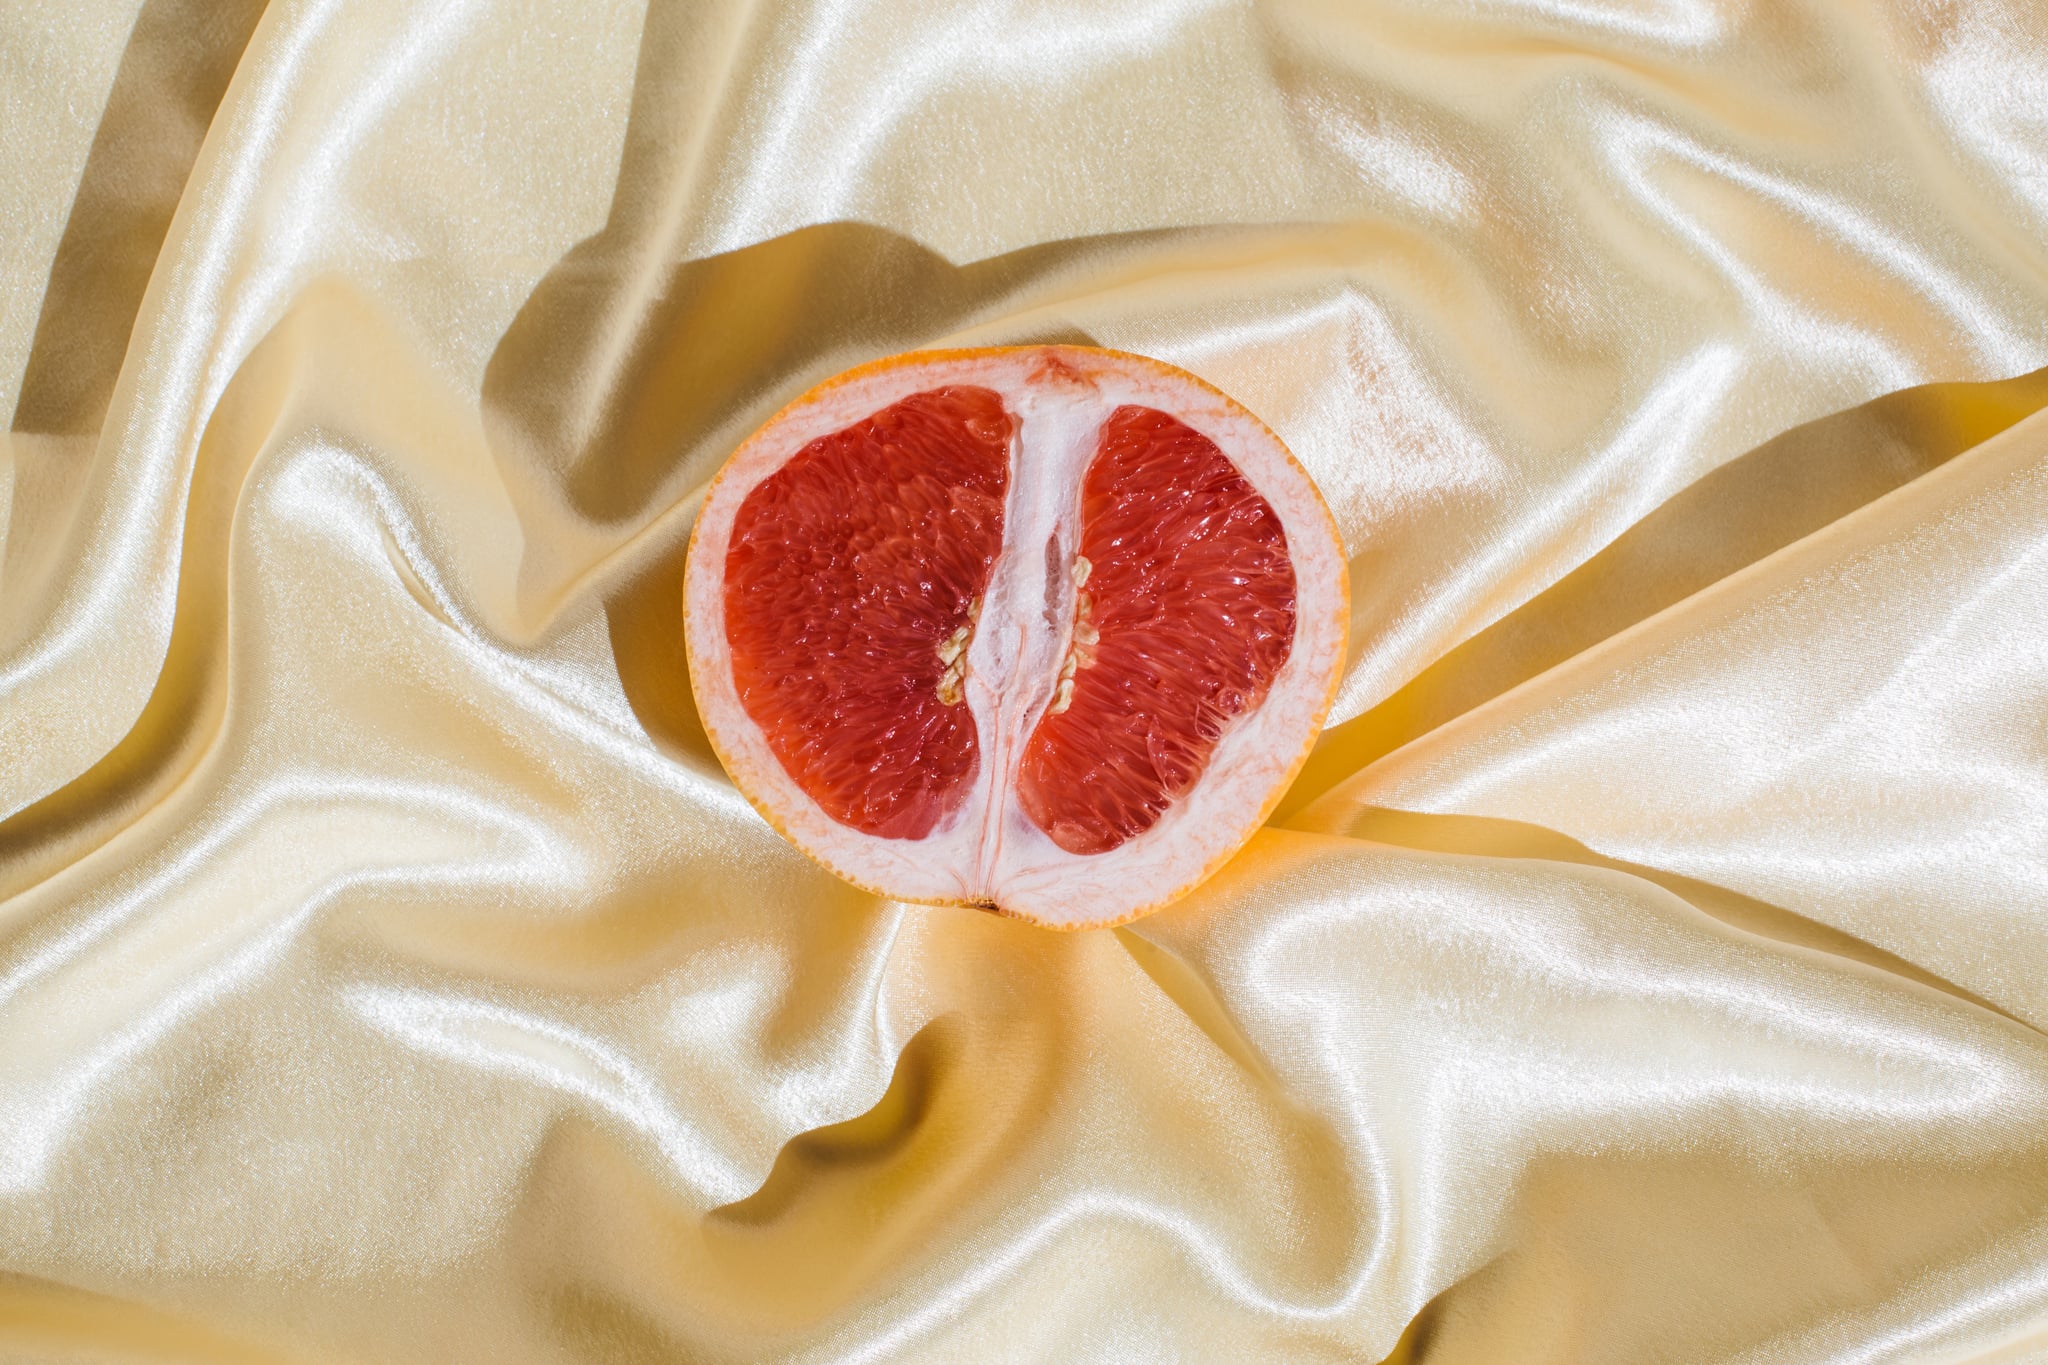 Fresh grapefruit on beige soft silk fabric background. Sex concept. Women's health, sexuality, erotic tension. Female vagina and clitoris symbol.